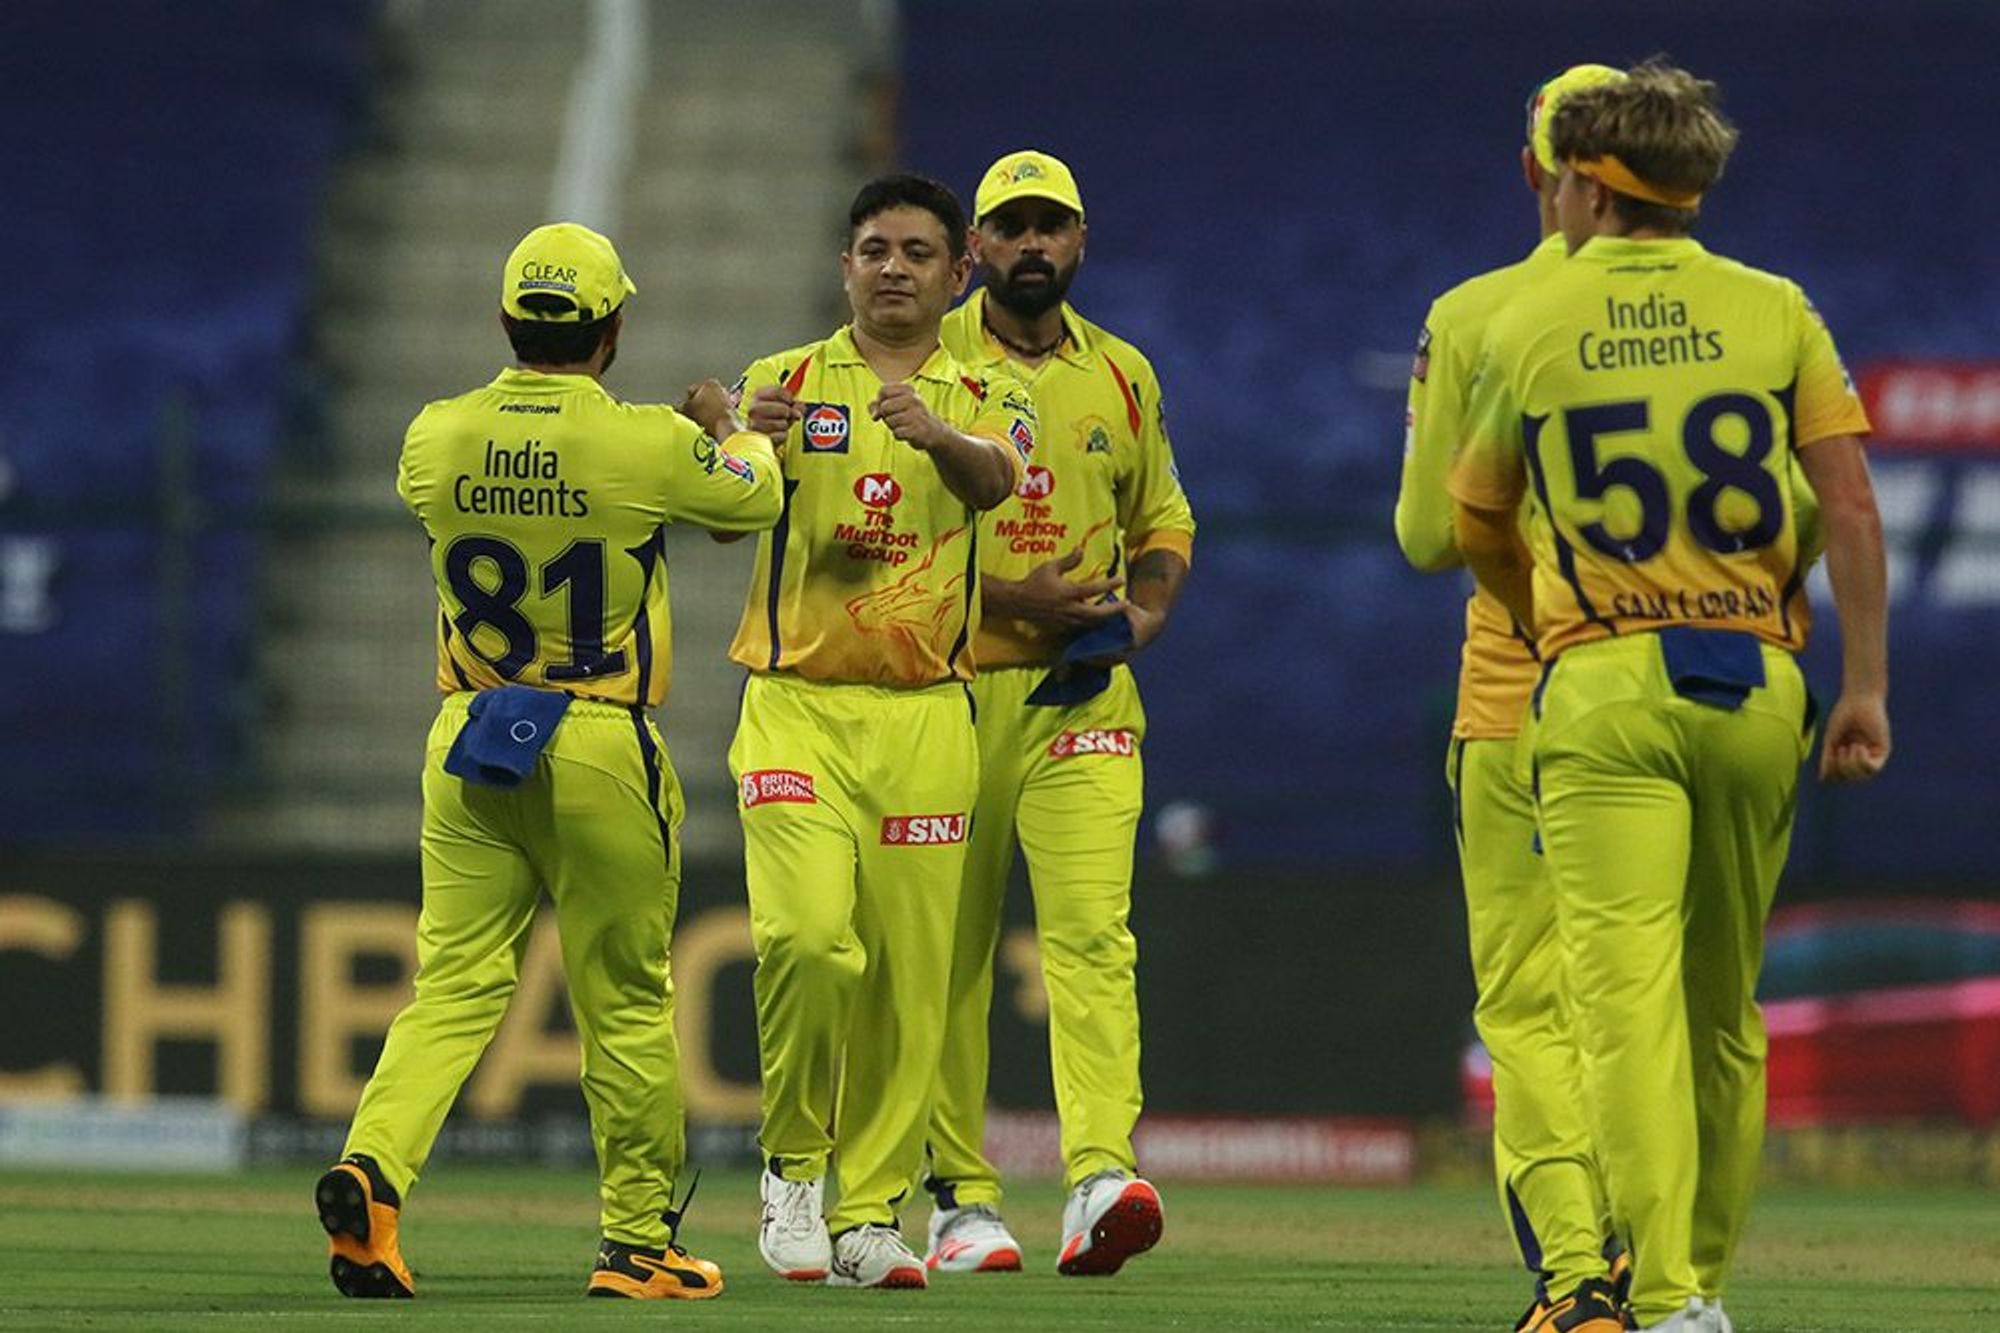 IPL 2021 | Piyush Chawla is someone who knows how to handle pressure, explains Zaheer Khan 